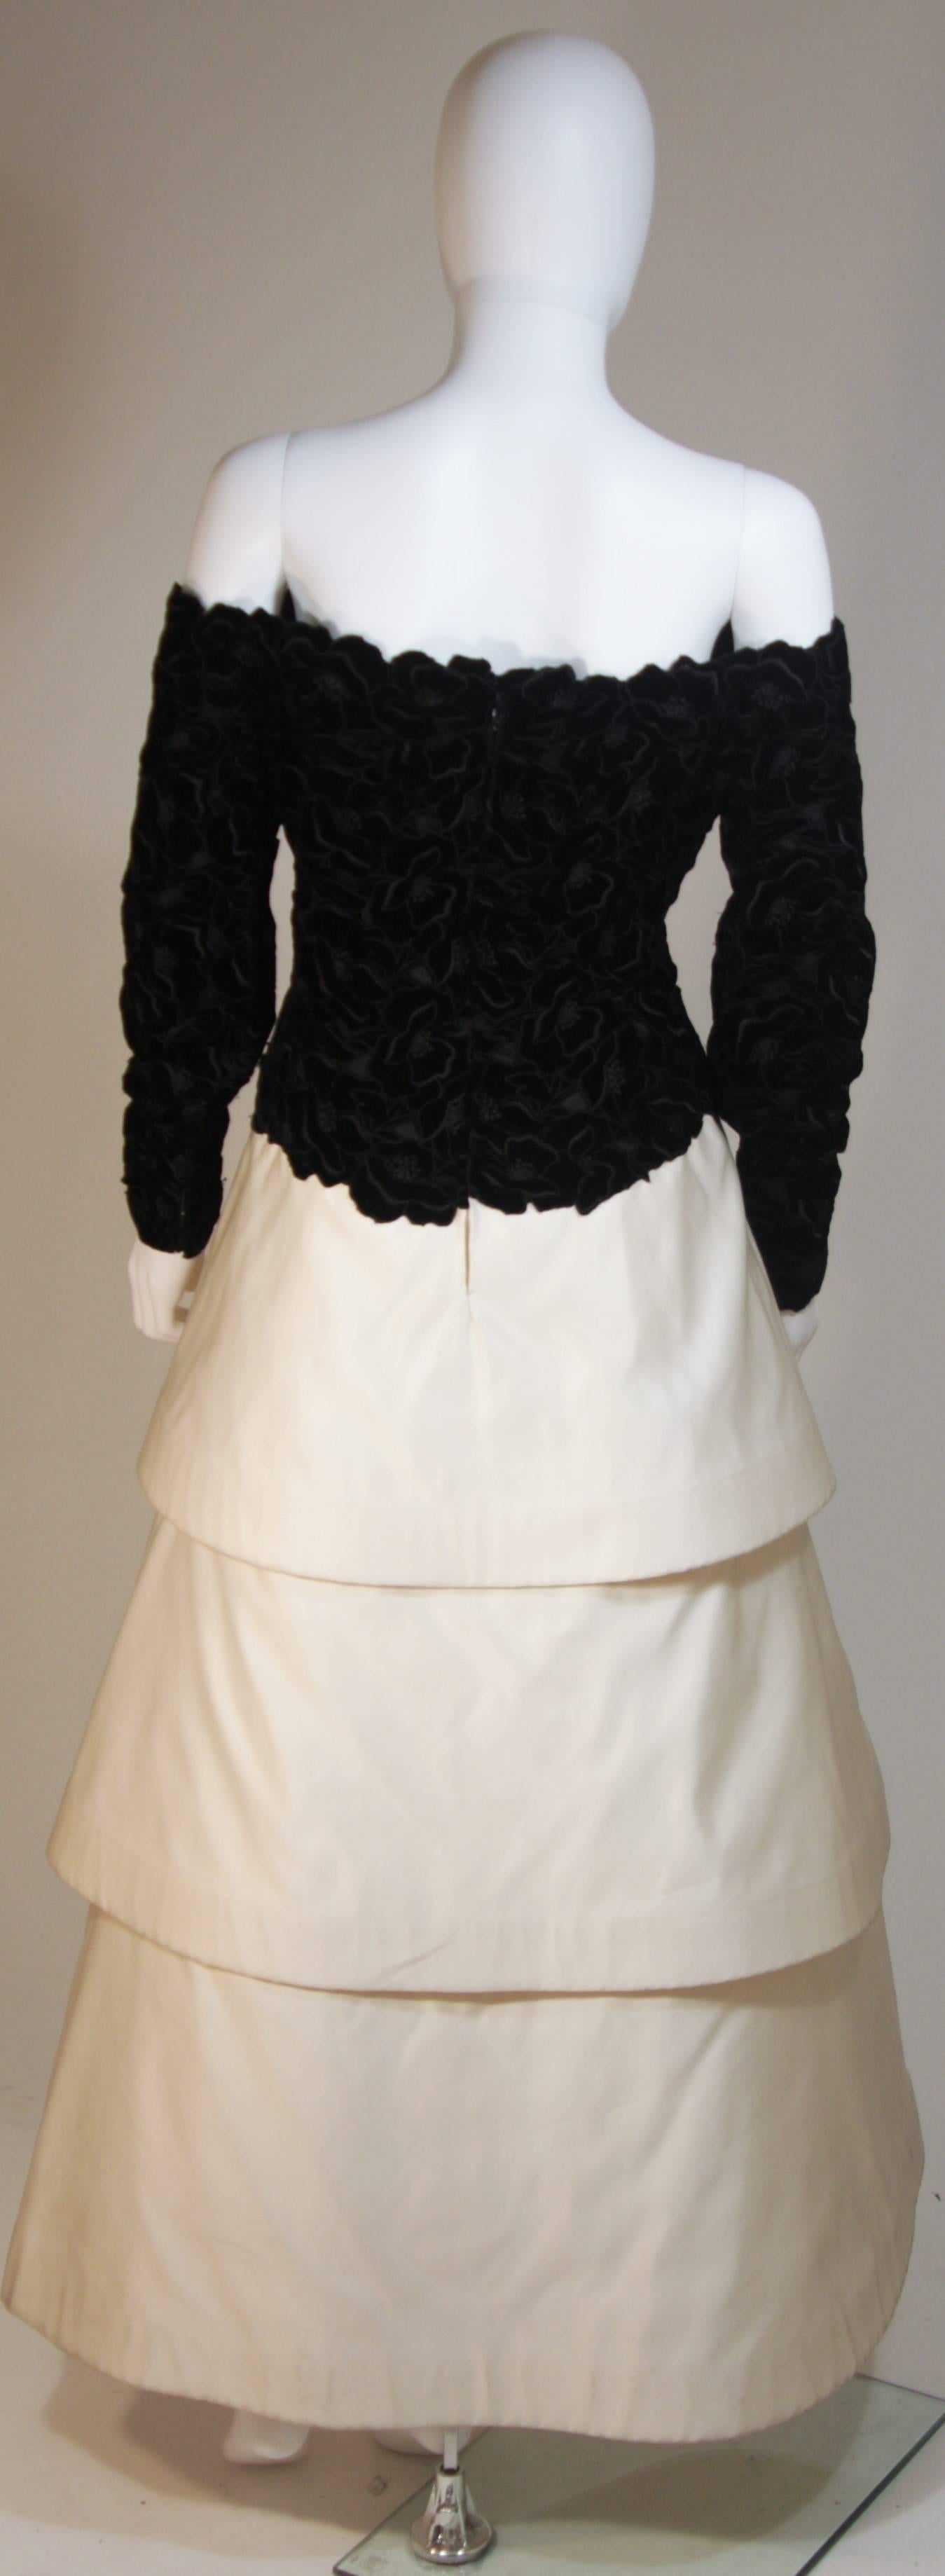 ARNOLD SCAASI Black Velvet Floral Design Gown with Satin Tiered Skirt Size 12-14 For Sale 4